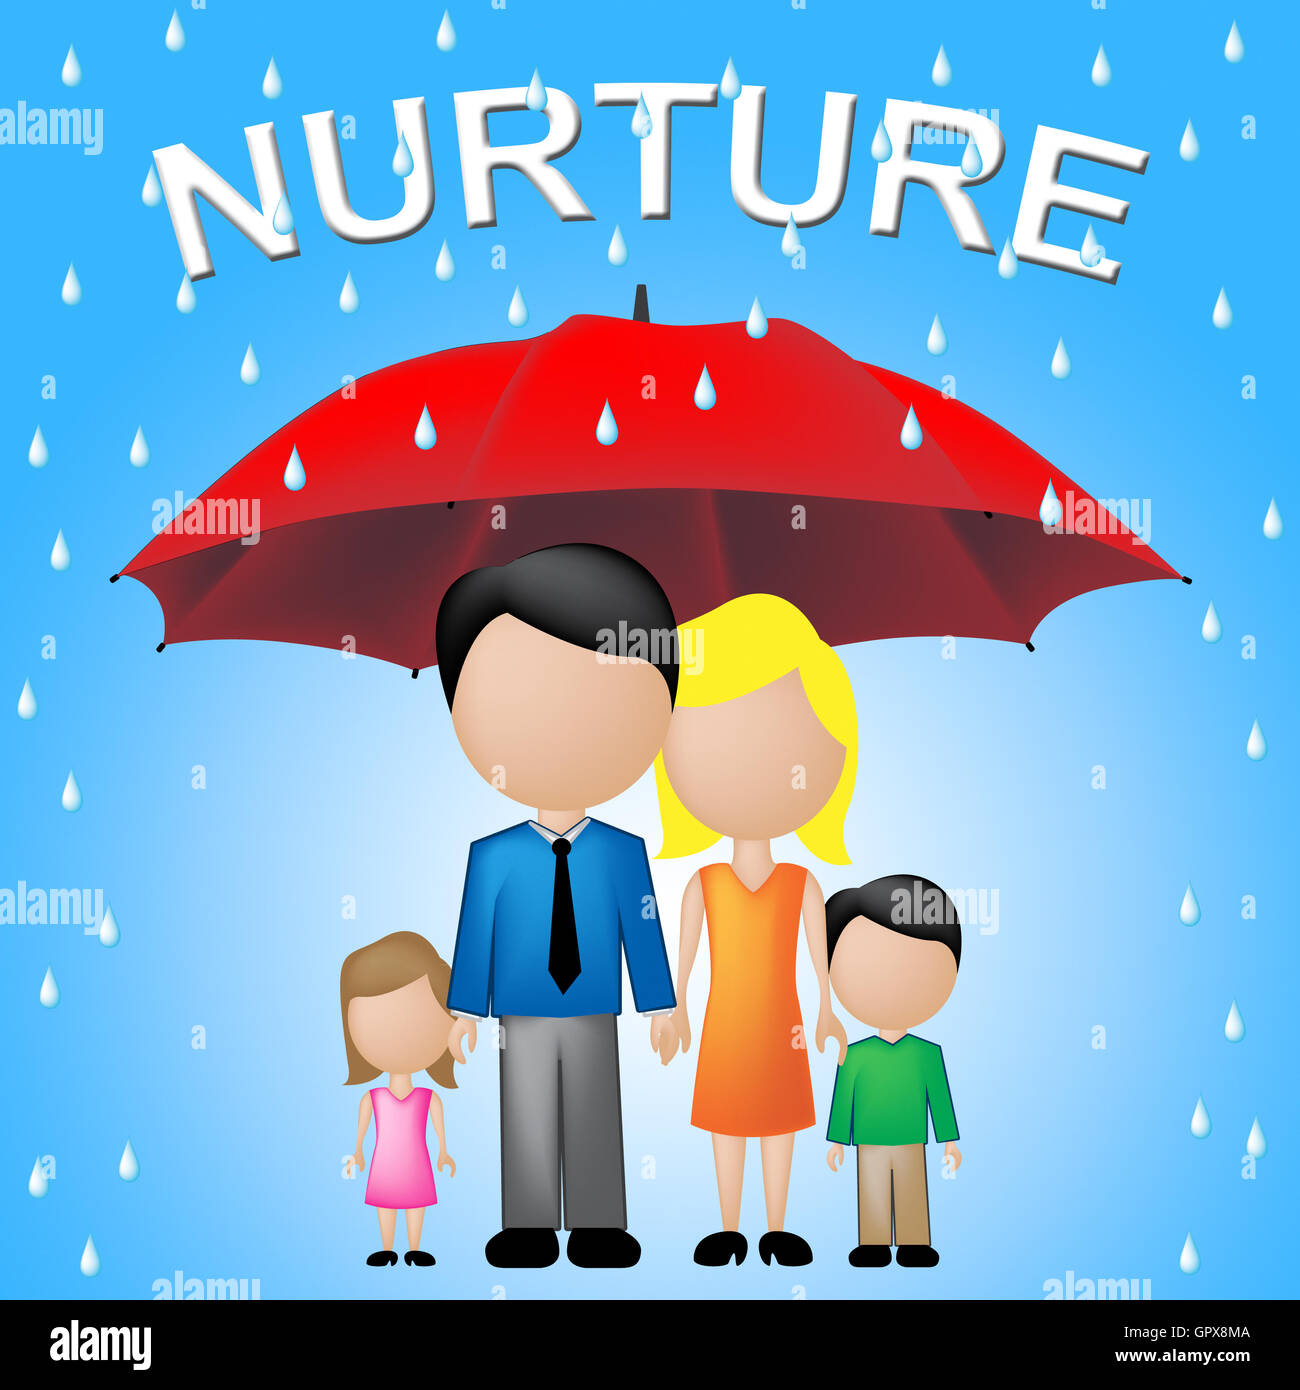 Nurture Kids Meaning Mentor Teaching And Development Stock Photo